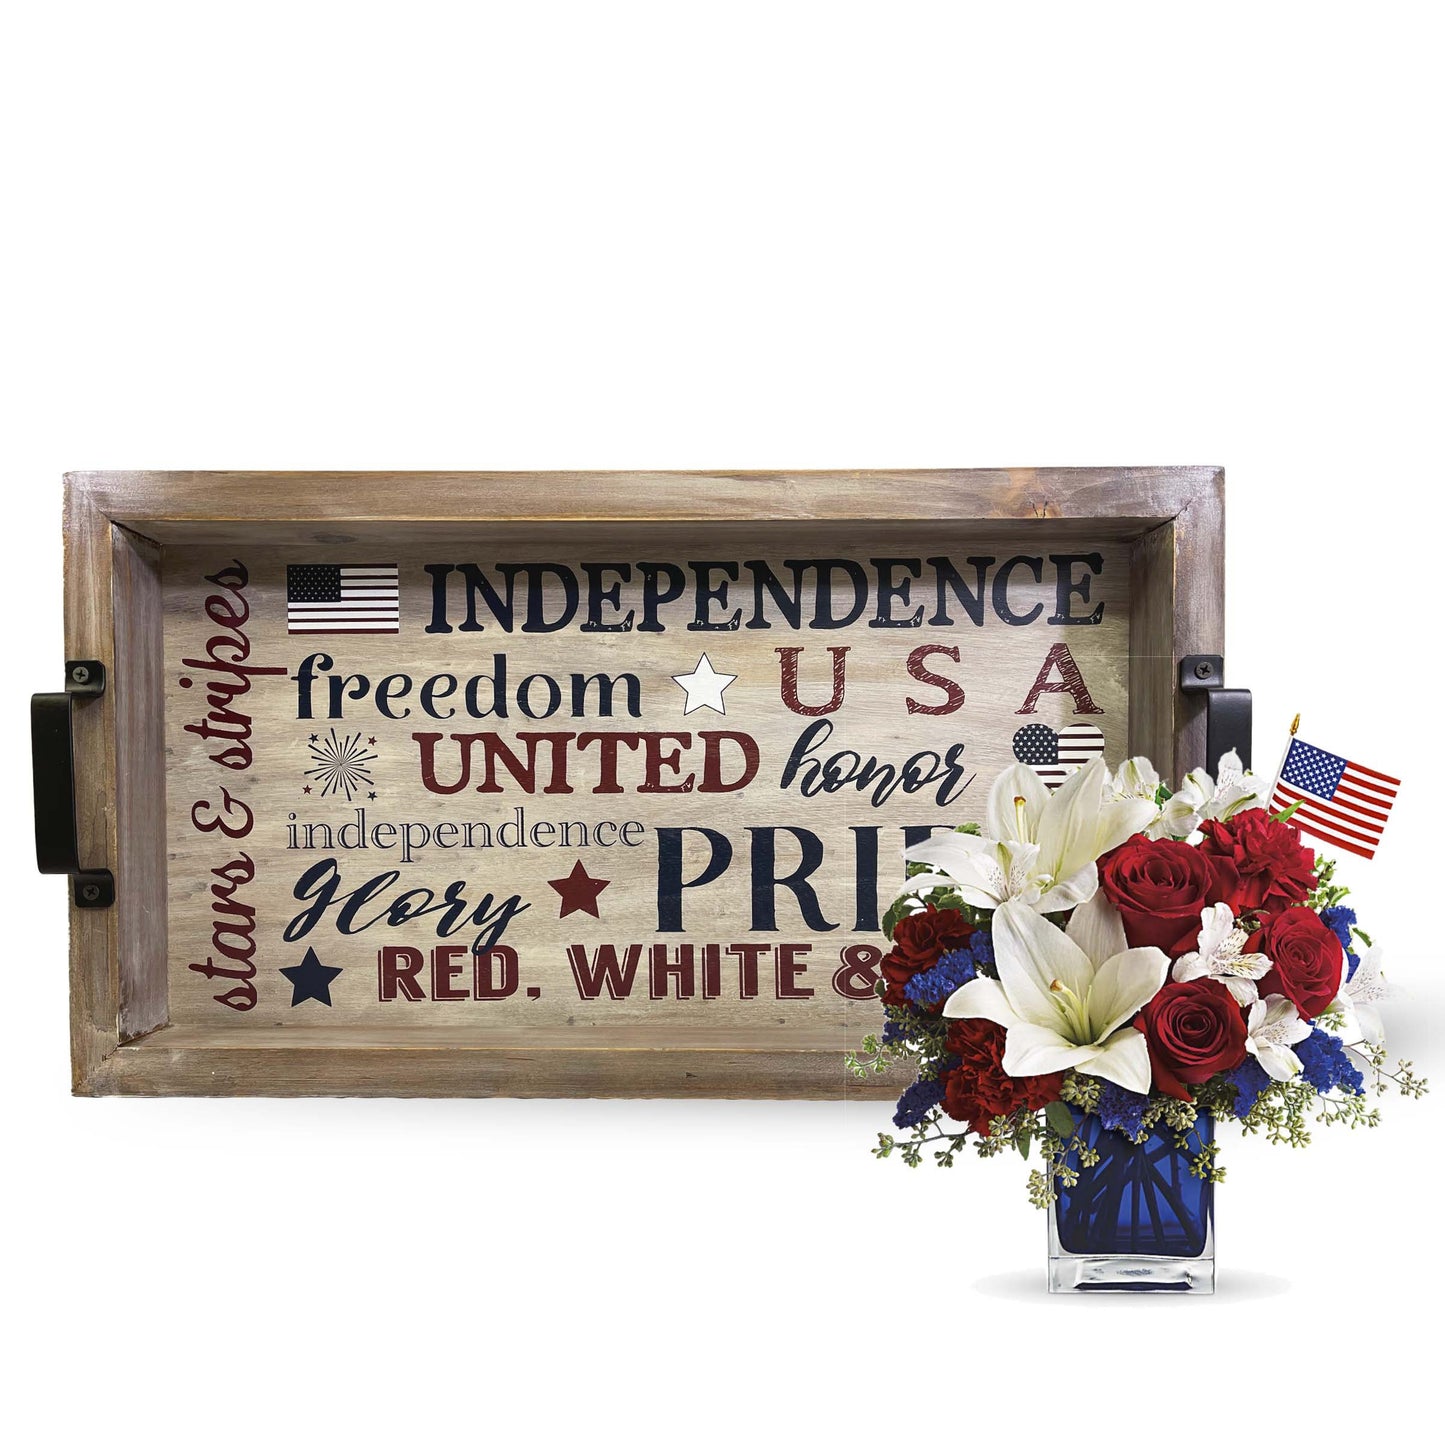 Pride Wood Serving Tray, Rustic Americana Wooden Trays for Kitchen, Dining Room, or Living Room, 4th of July Platter